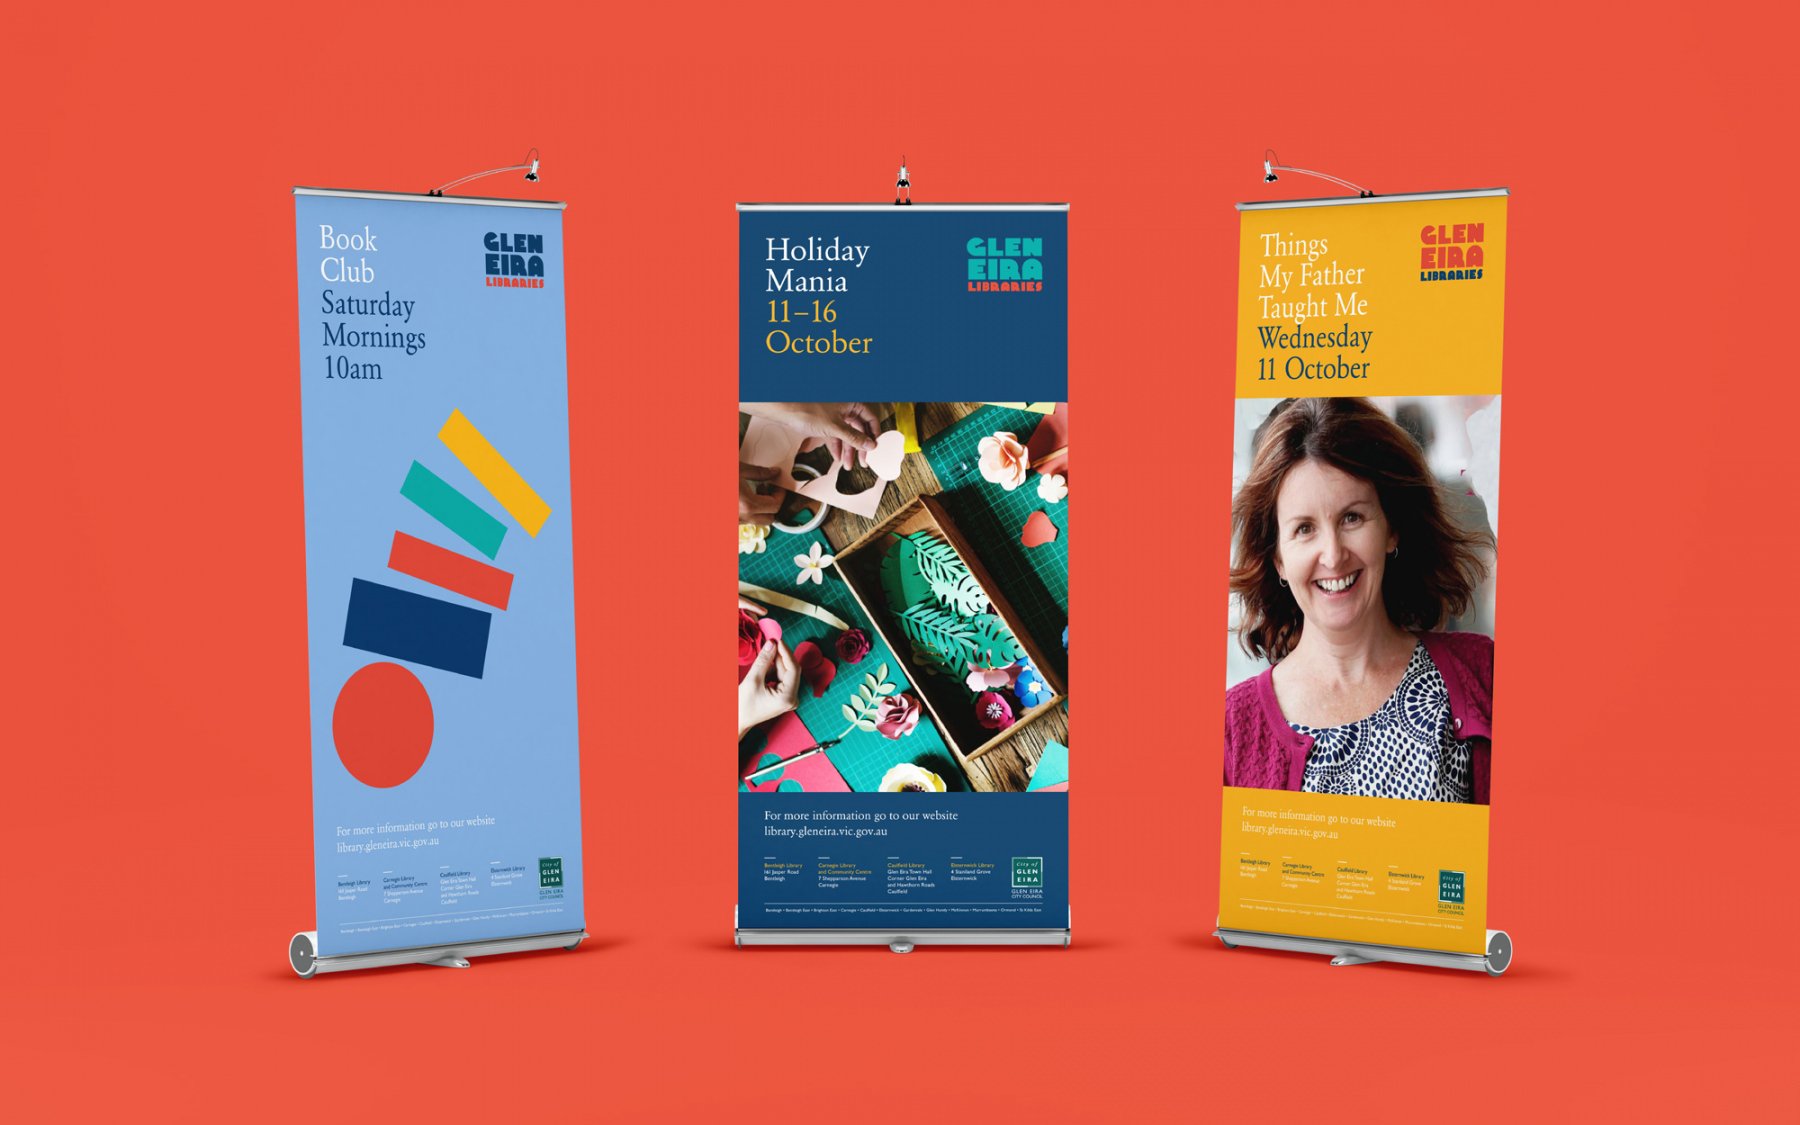 Glen Eira Libraries pull up banners advertising various activities.